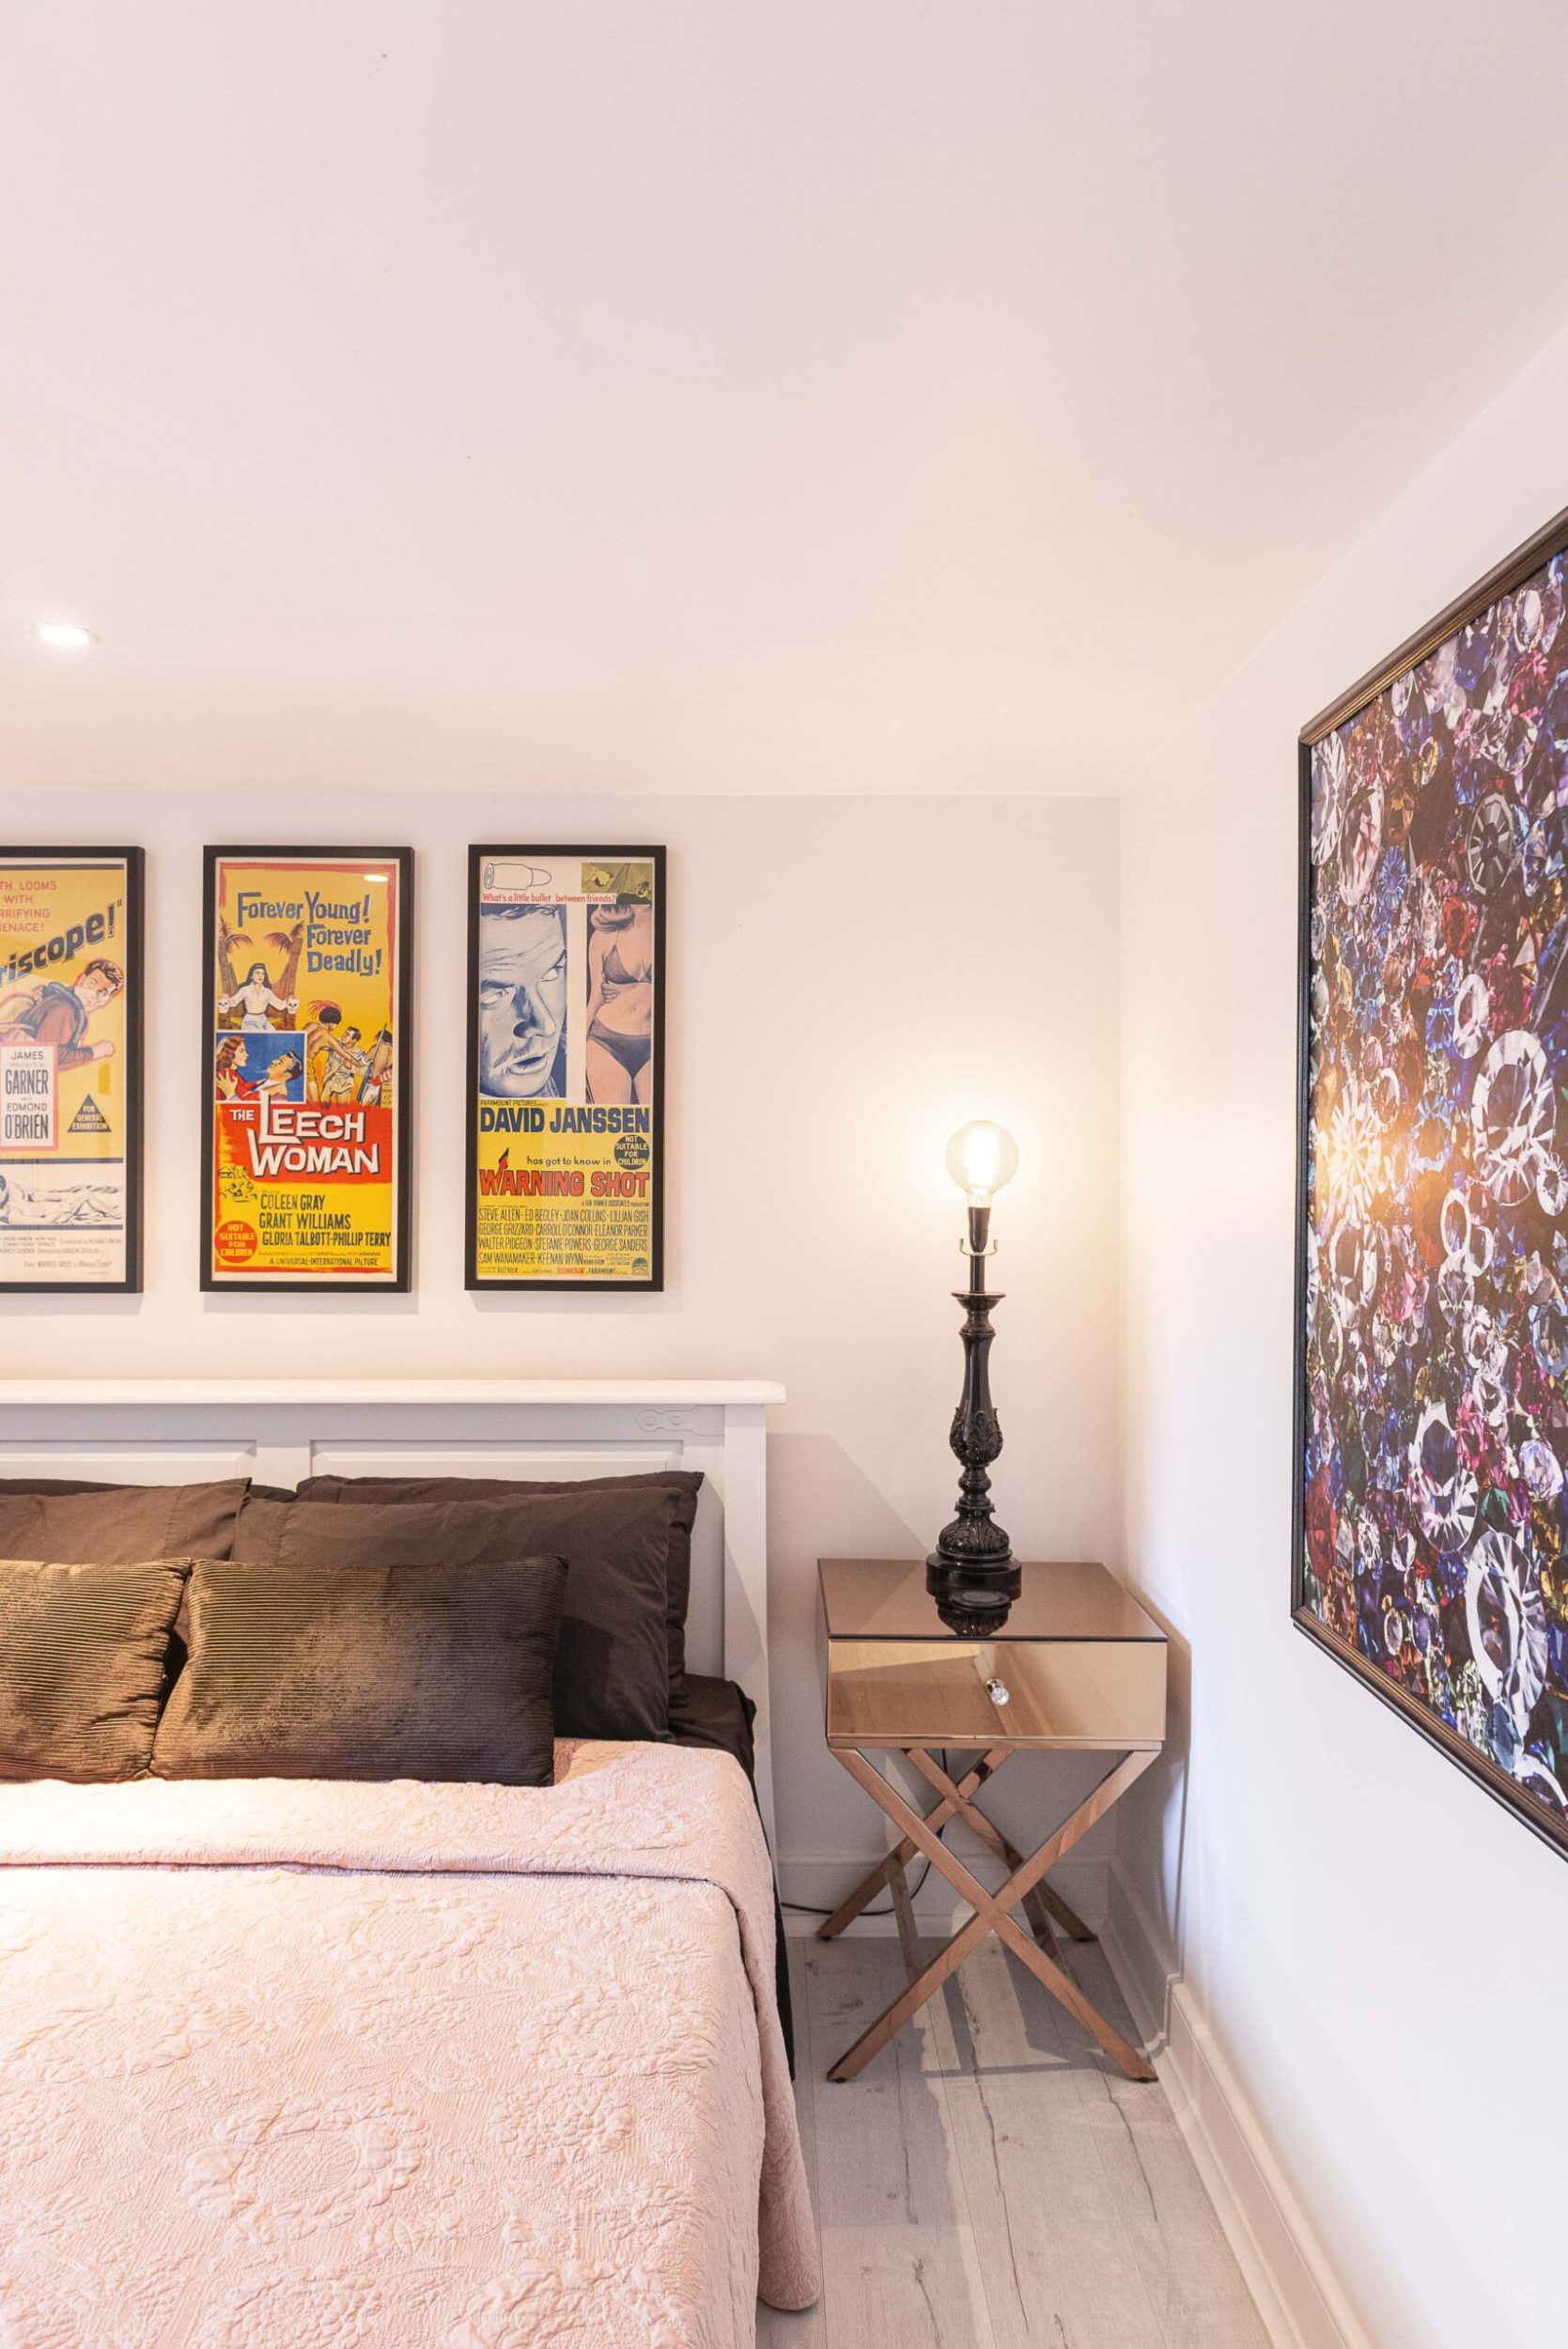 Corner of bedroom with three framed posters and art on walls